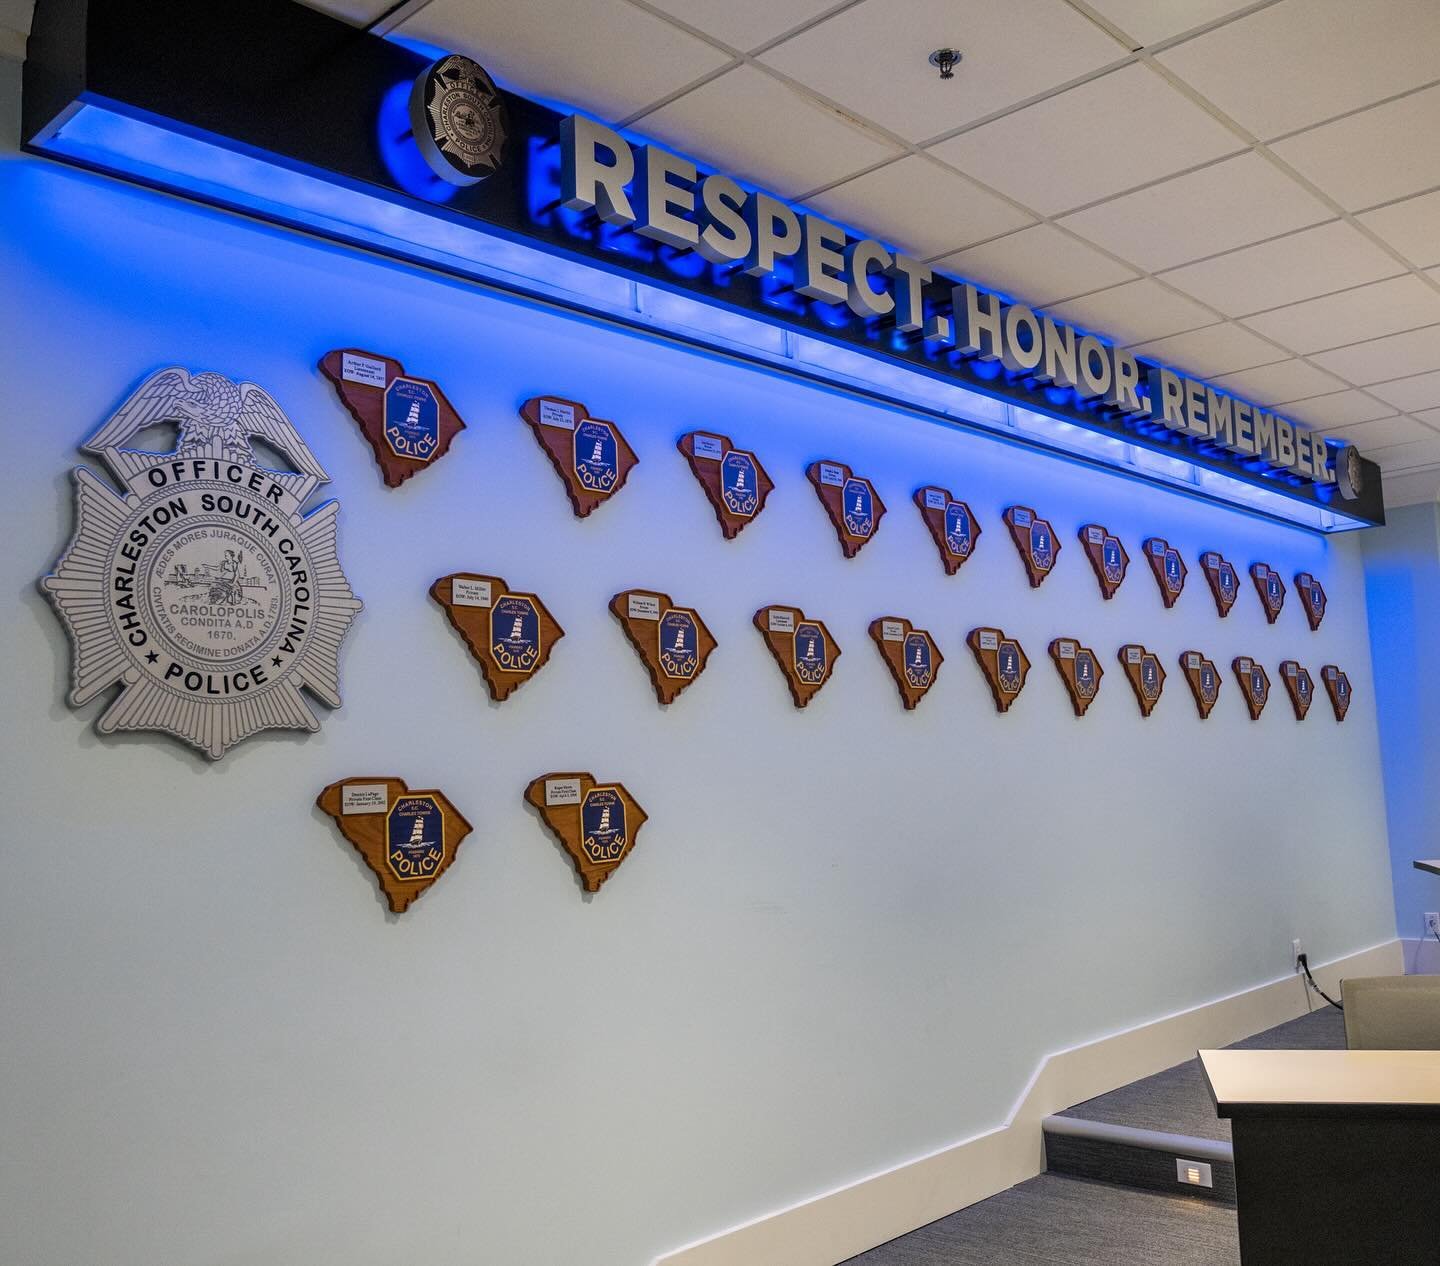 👮 During National Police Week, we honor and remember the bravery and sacrifice of police officers who have lost their lives in the line of duty. 

With your support, the LENS Foundation commissioned this&nbsp;memorial wall at the @charlestonpolicede